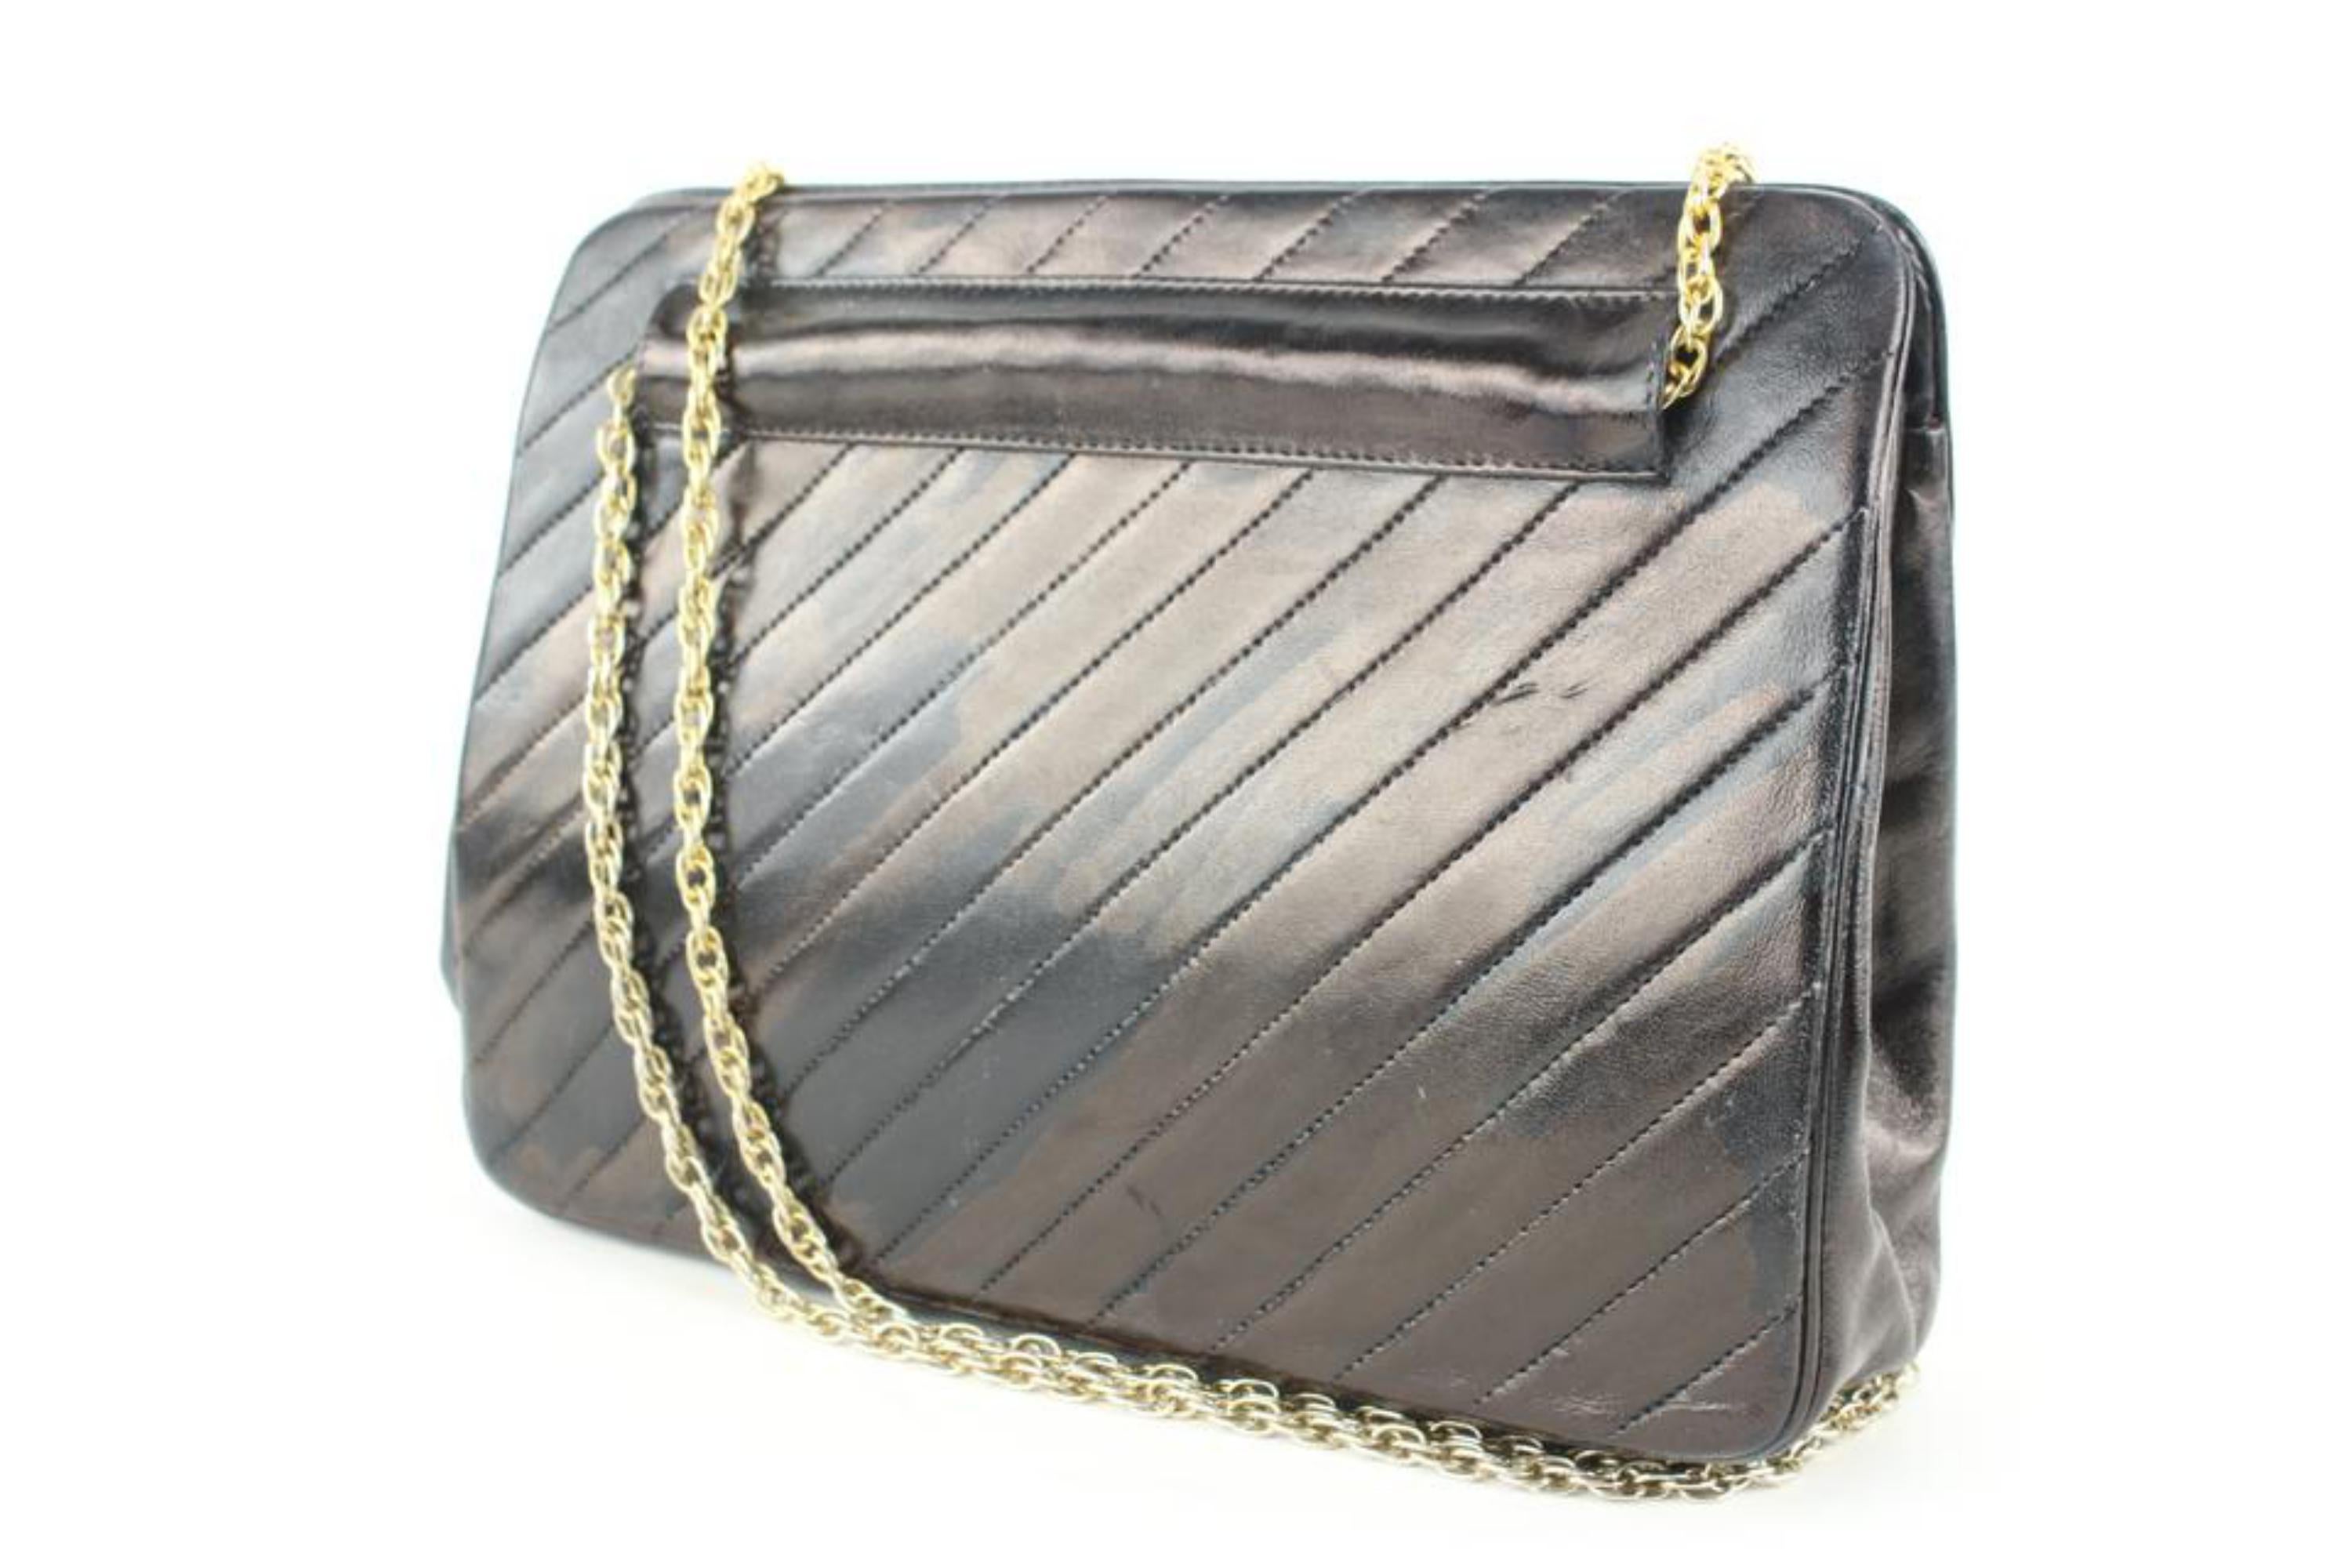 Chanel Black Chevron Leather Chain Bag 113ca57
Made In: France
Measurements: Length:  9.5